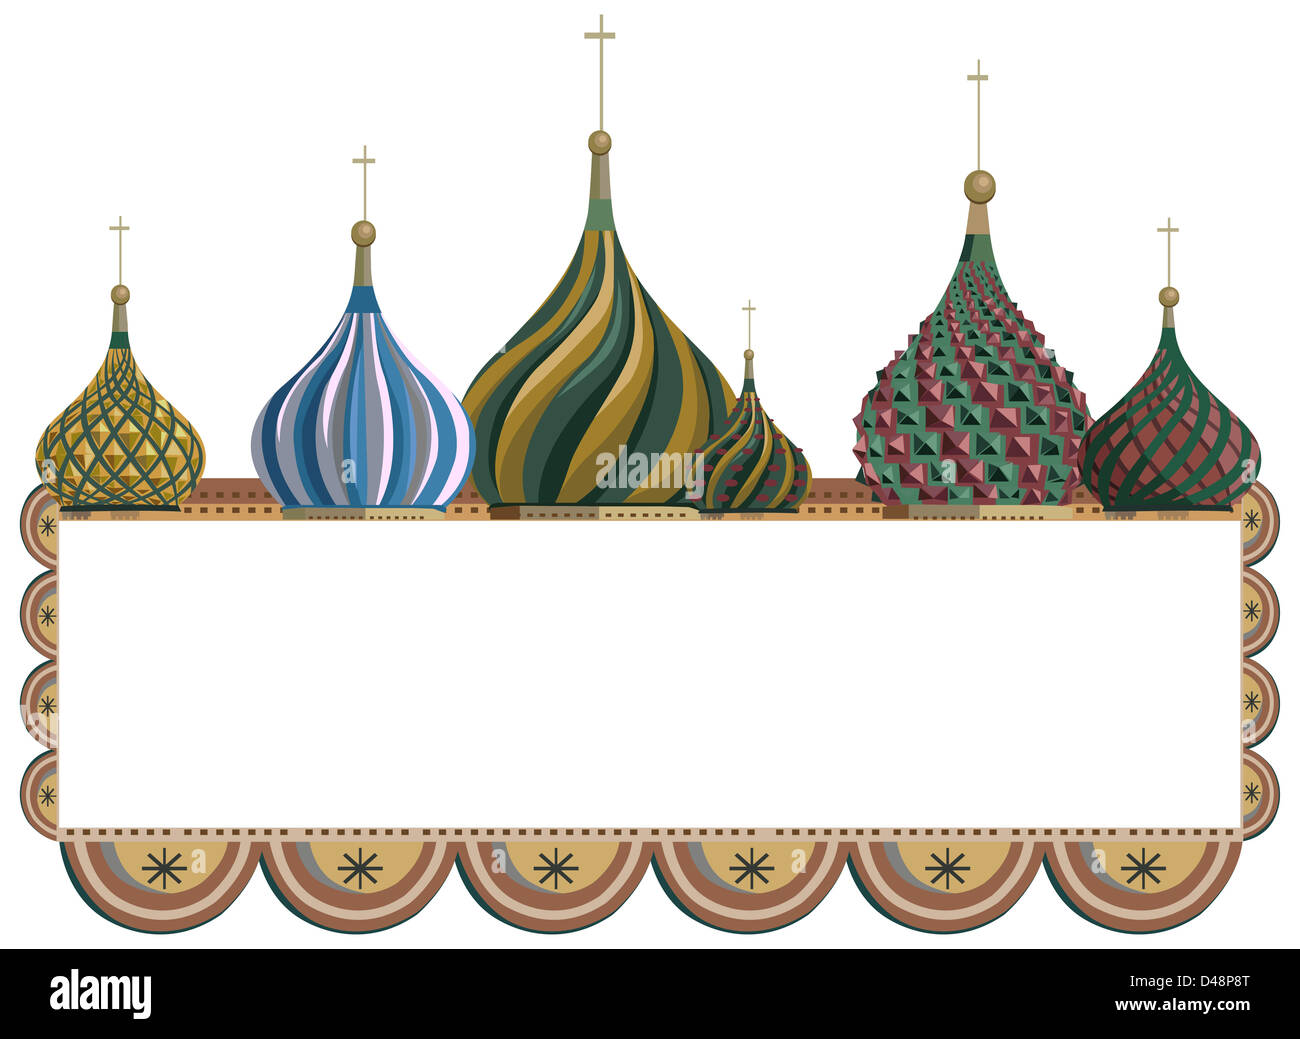 Ornamental frame illustration with Kremlin domes, isolated on white Stock Photo